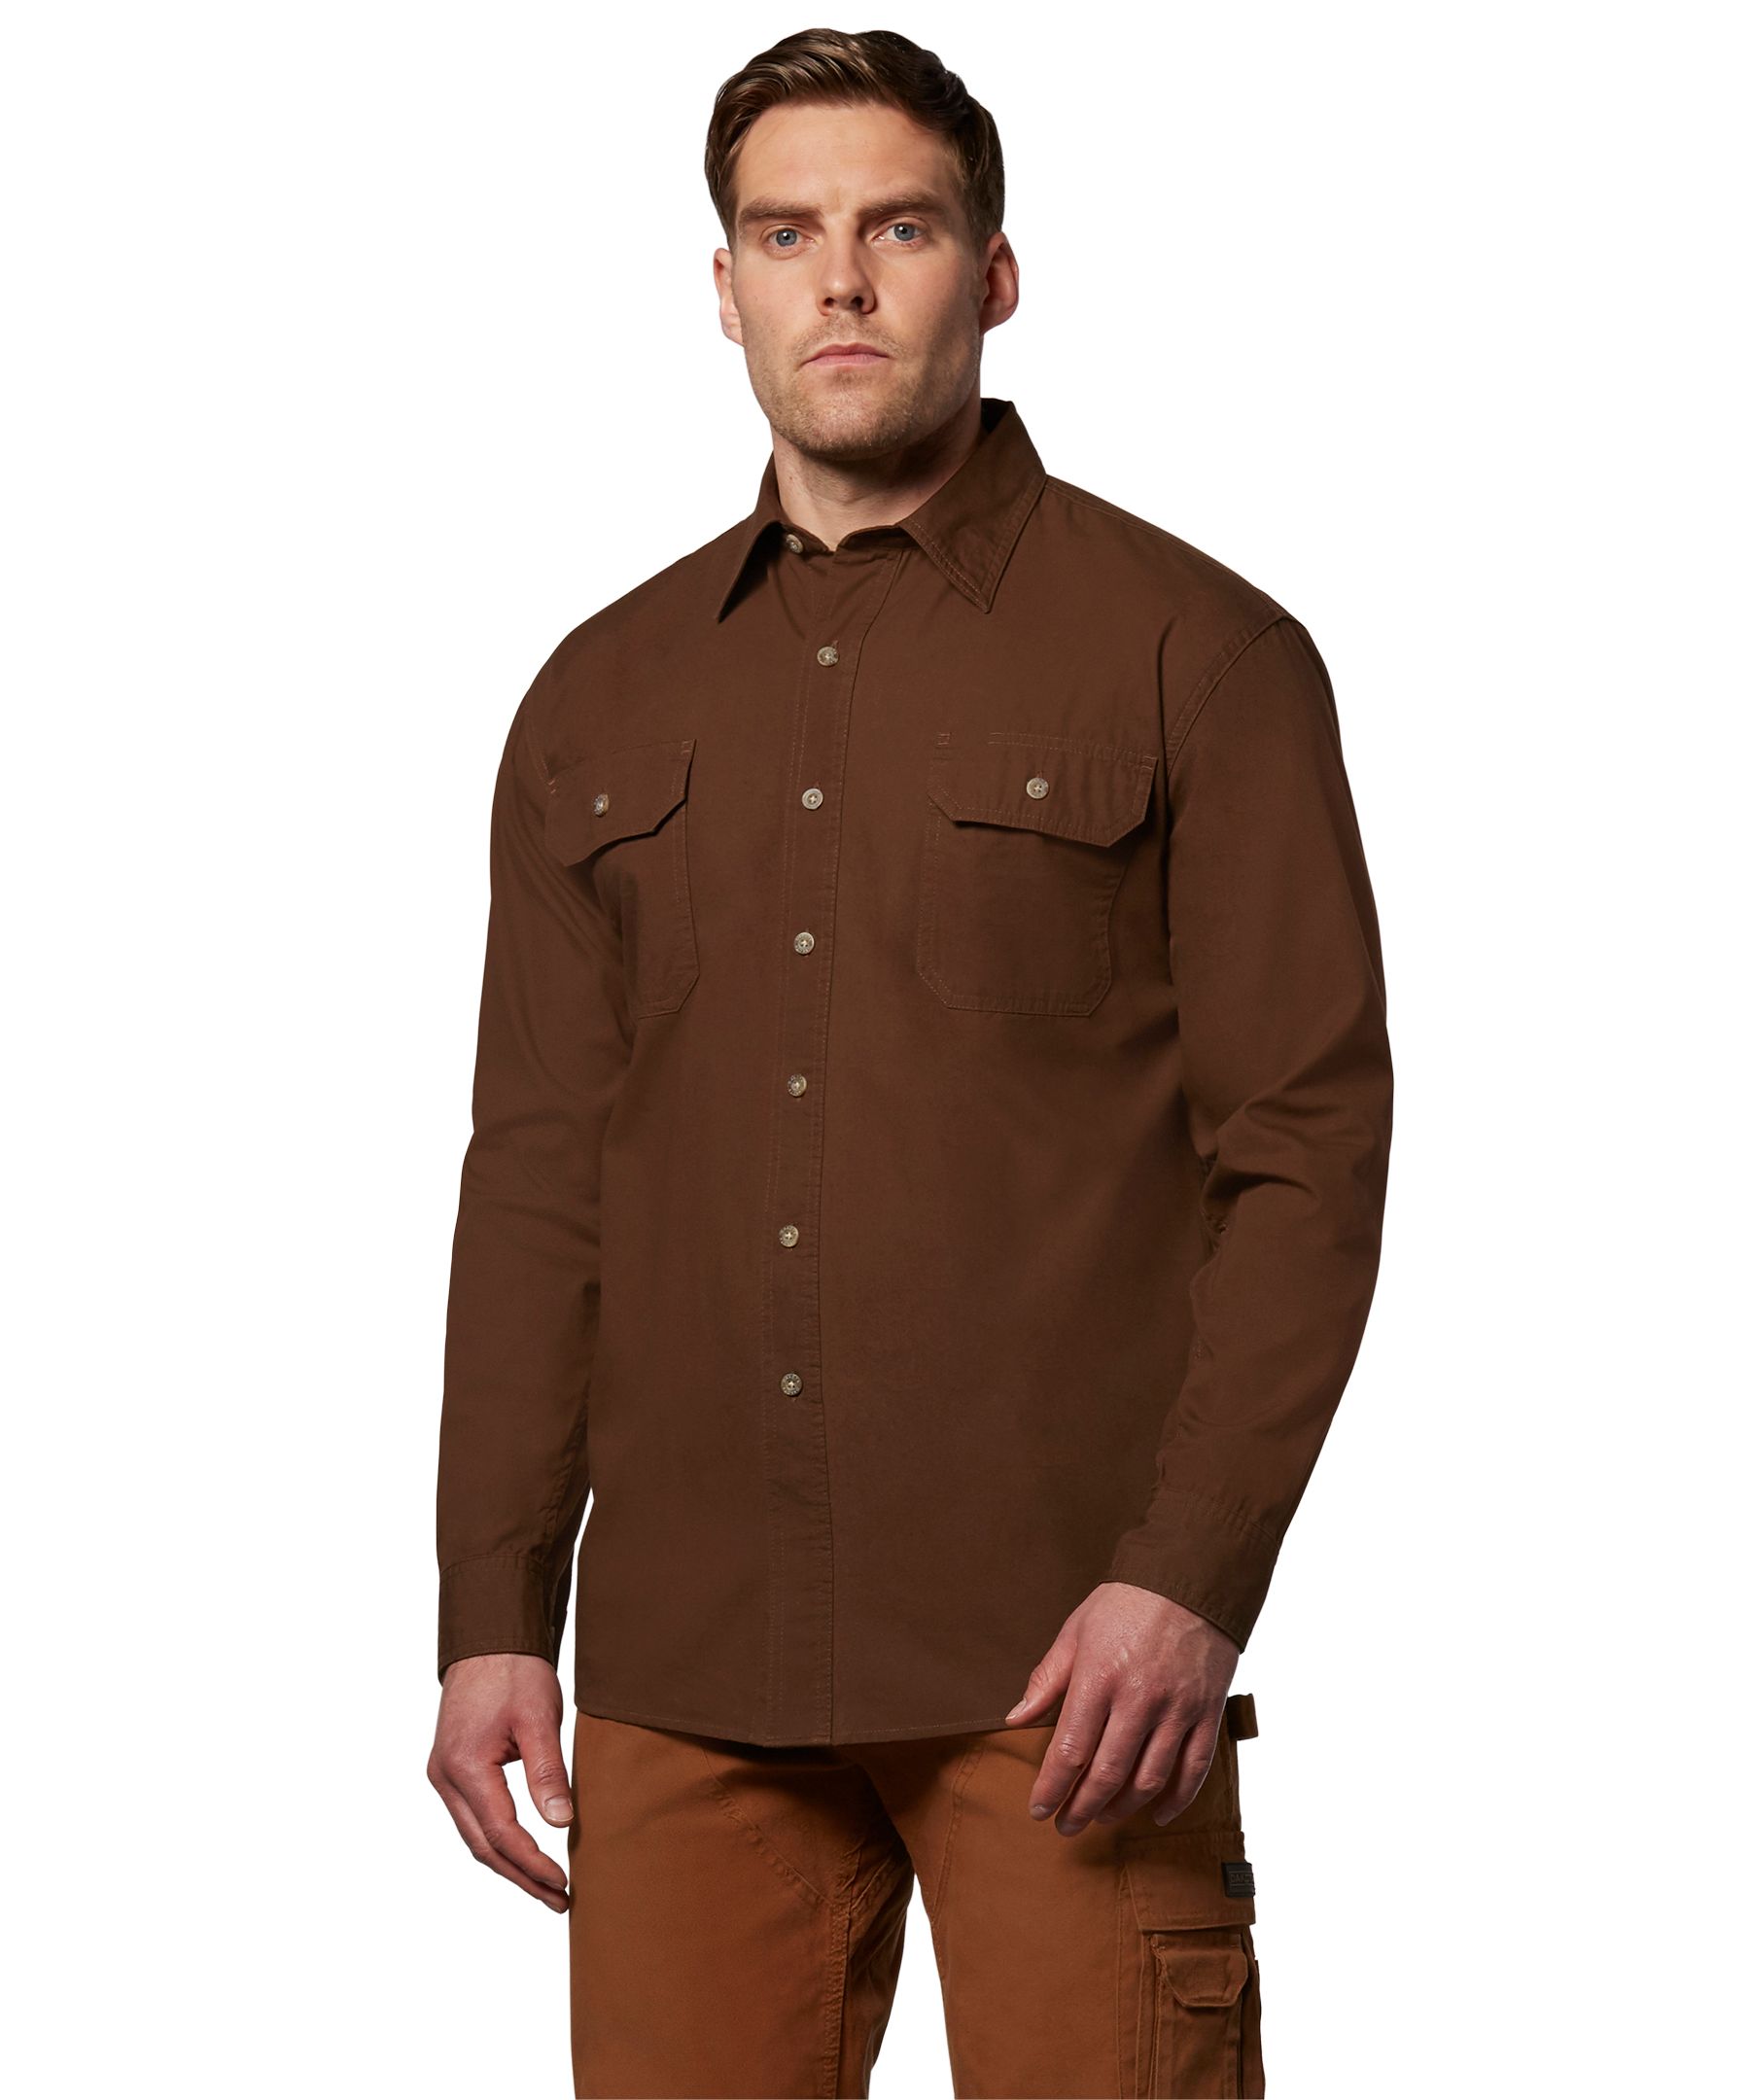 Dakota WorkPro Series Men's Relaxed Fit Long Sleeve Cotton Contractor ...